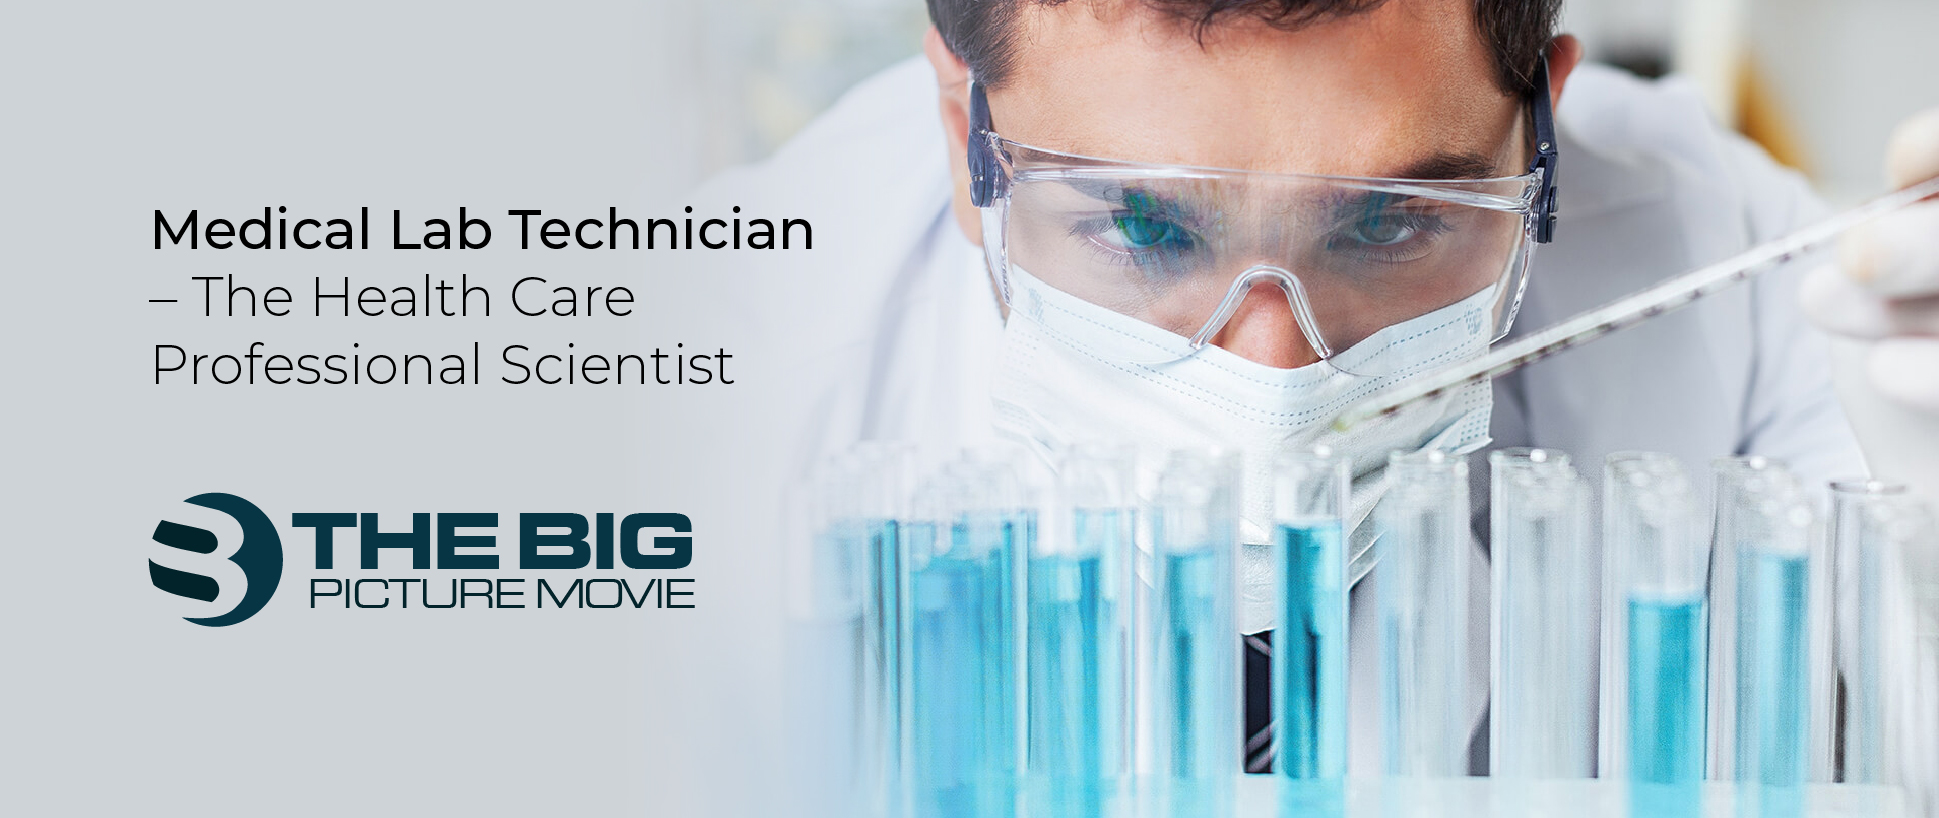 Medical Lab Technician – The Health Care Professional Scientist